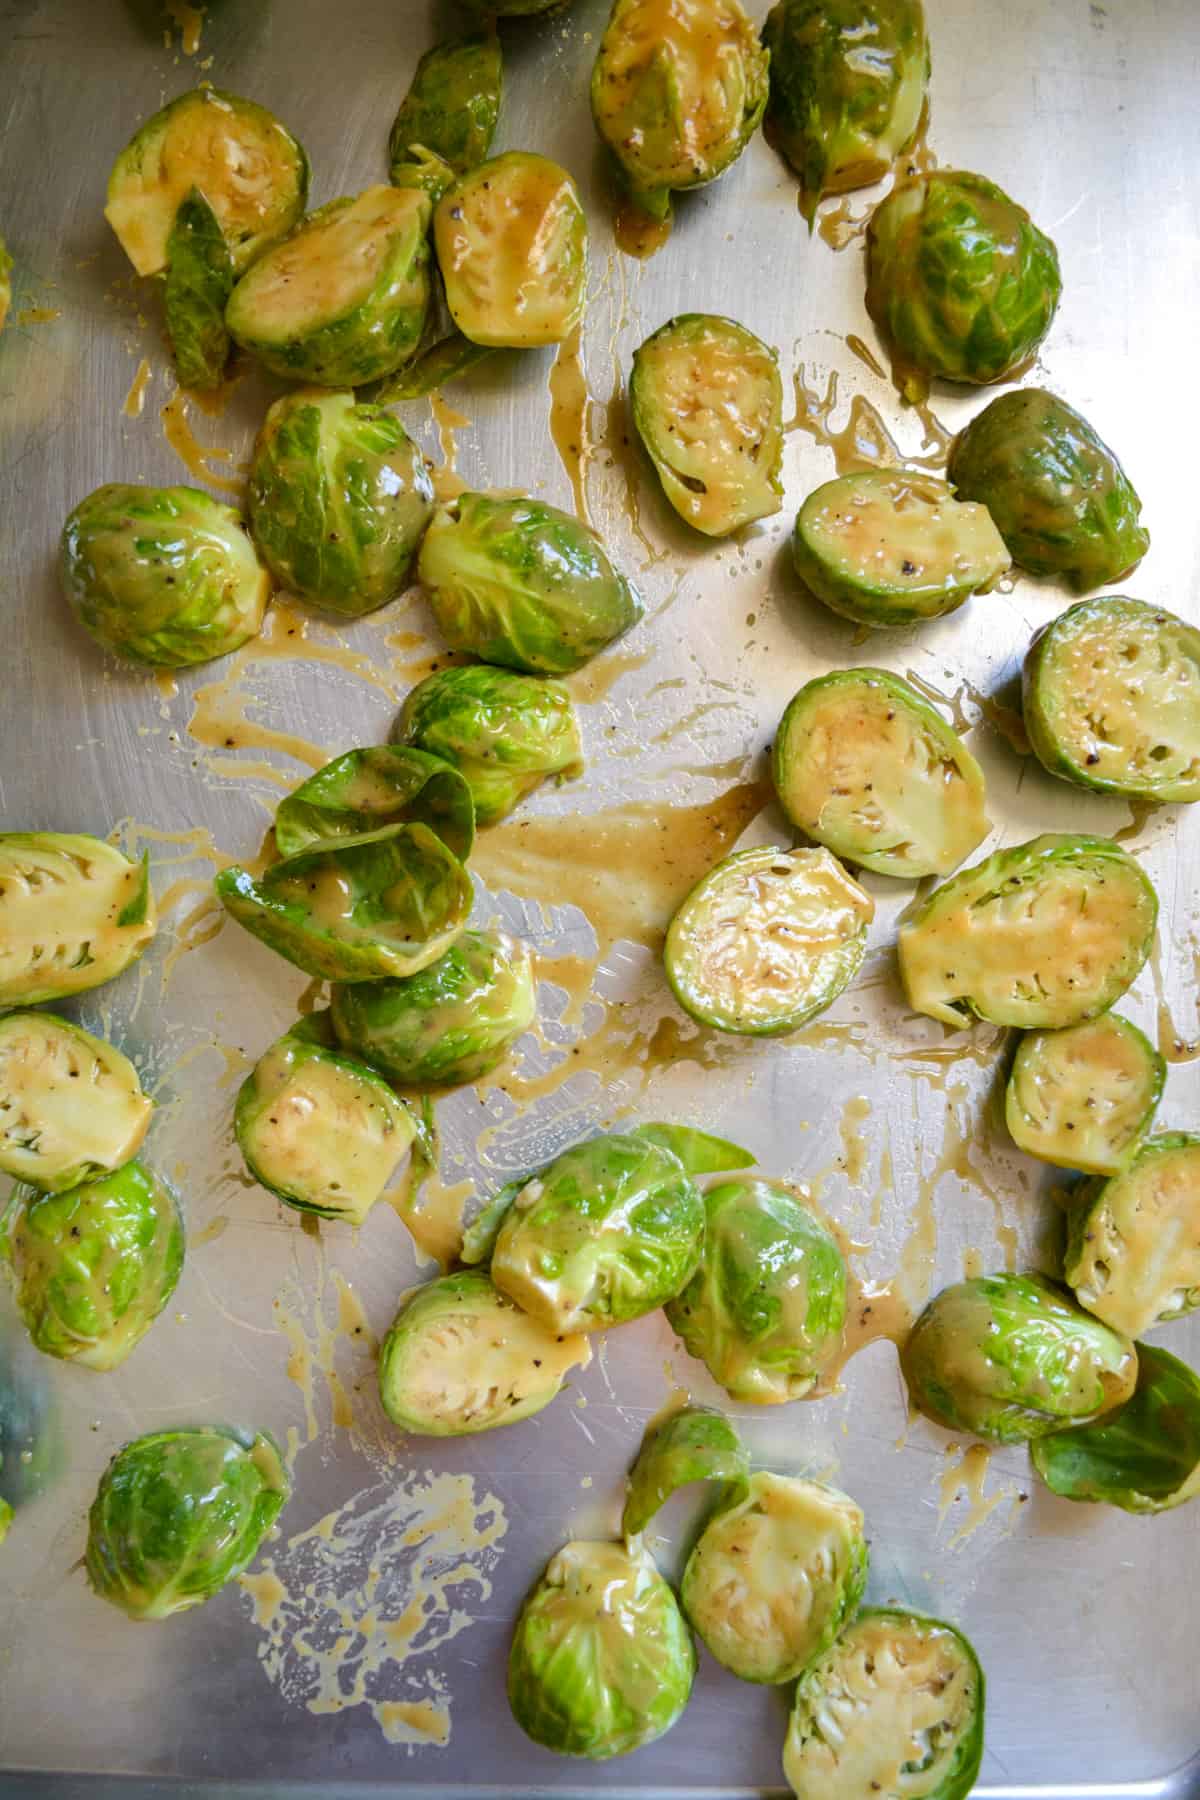 Overhead photo of Brussels sprouts on a baking sheet ready to roast.